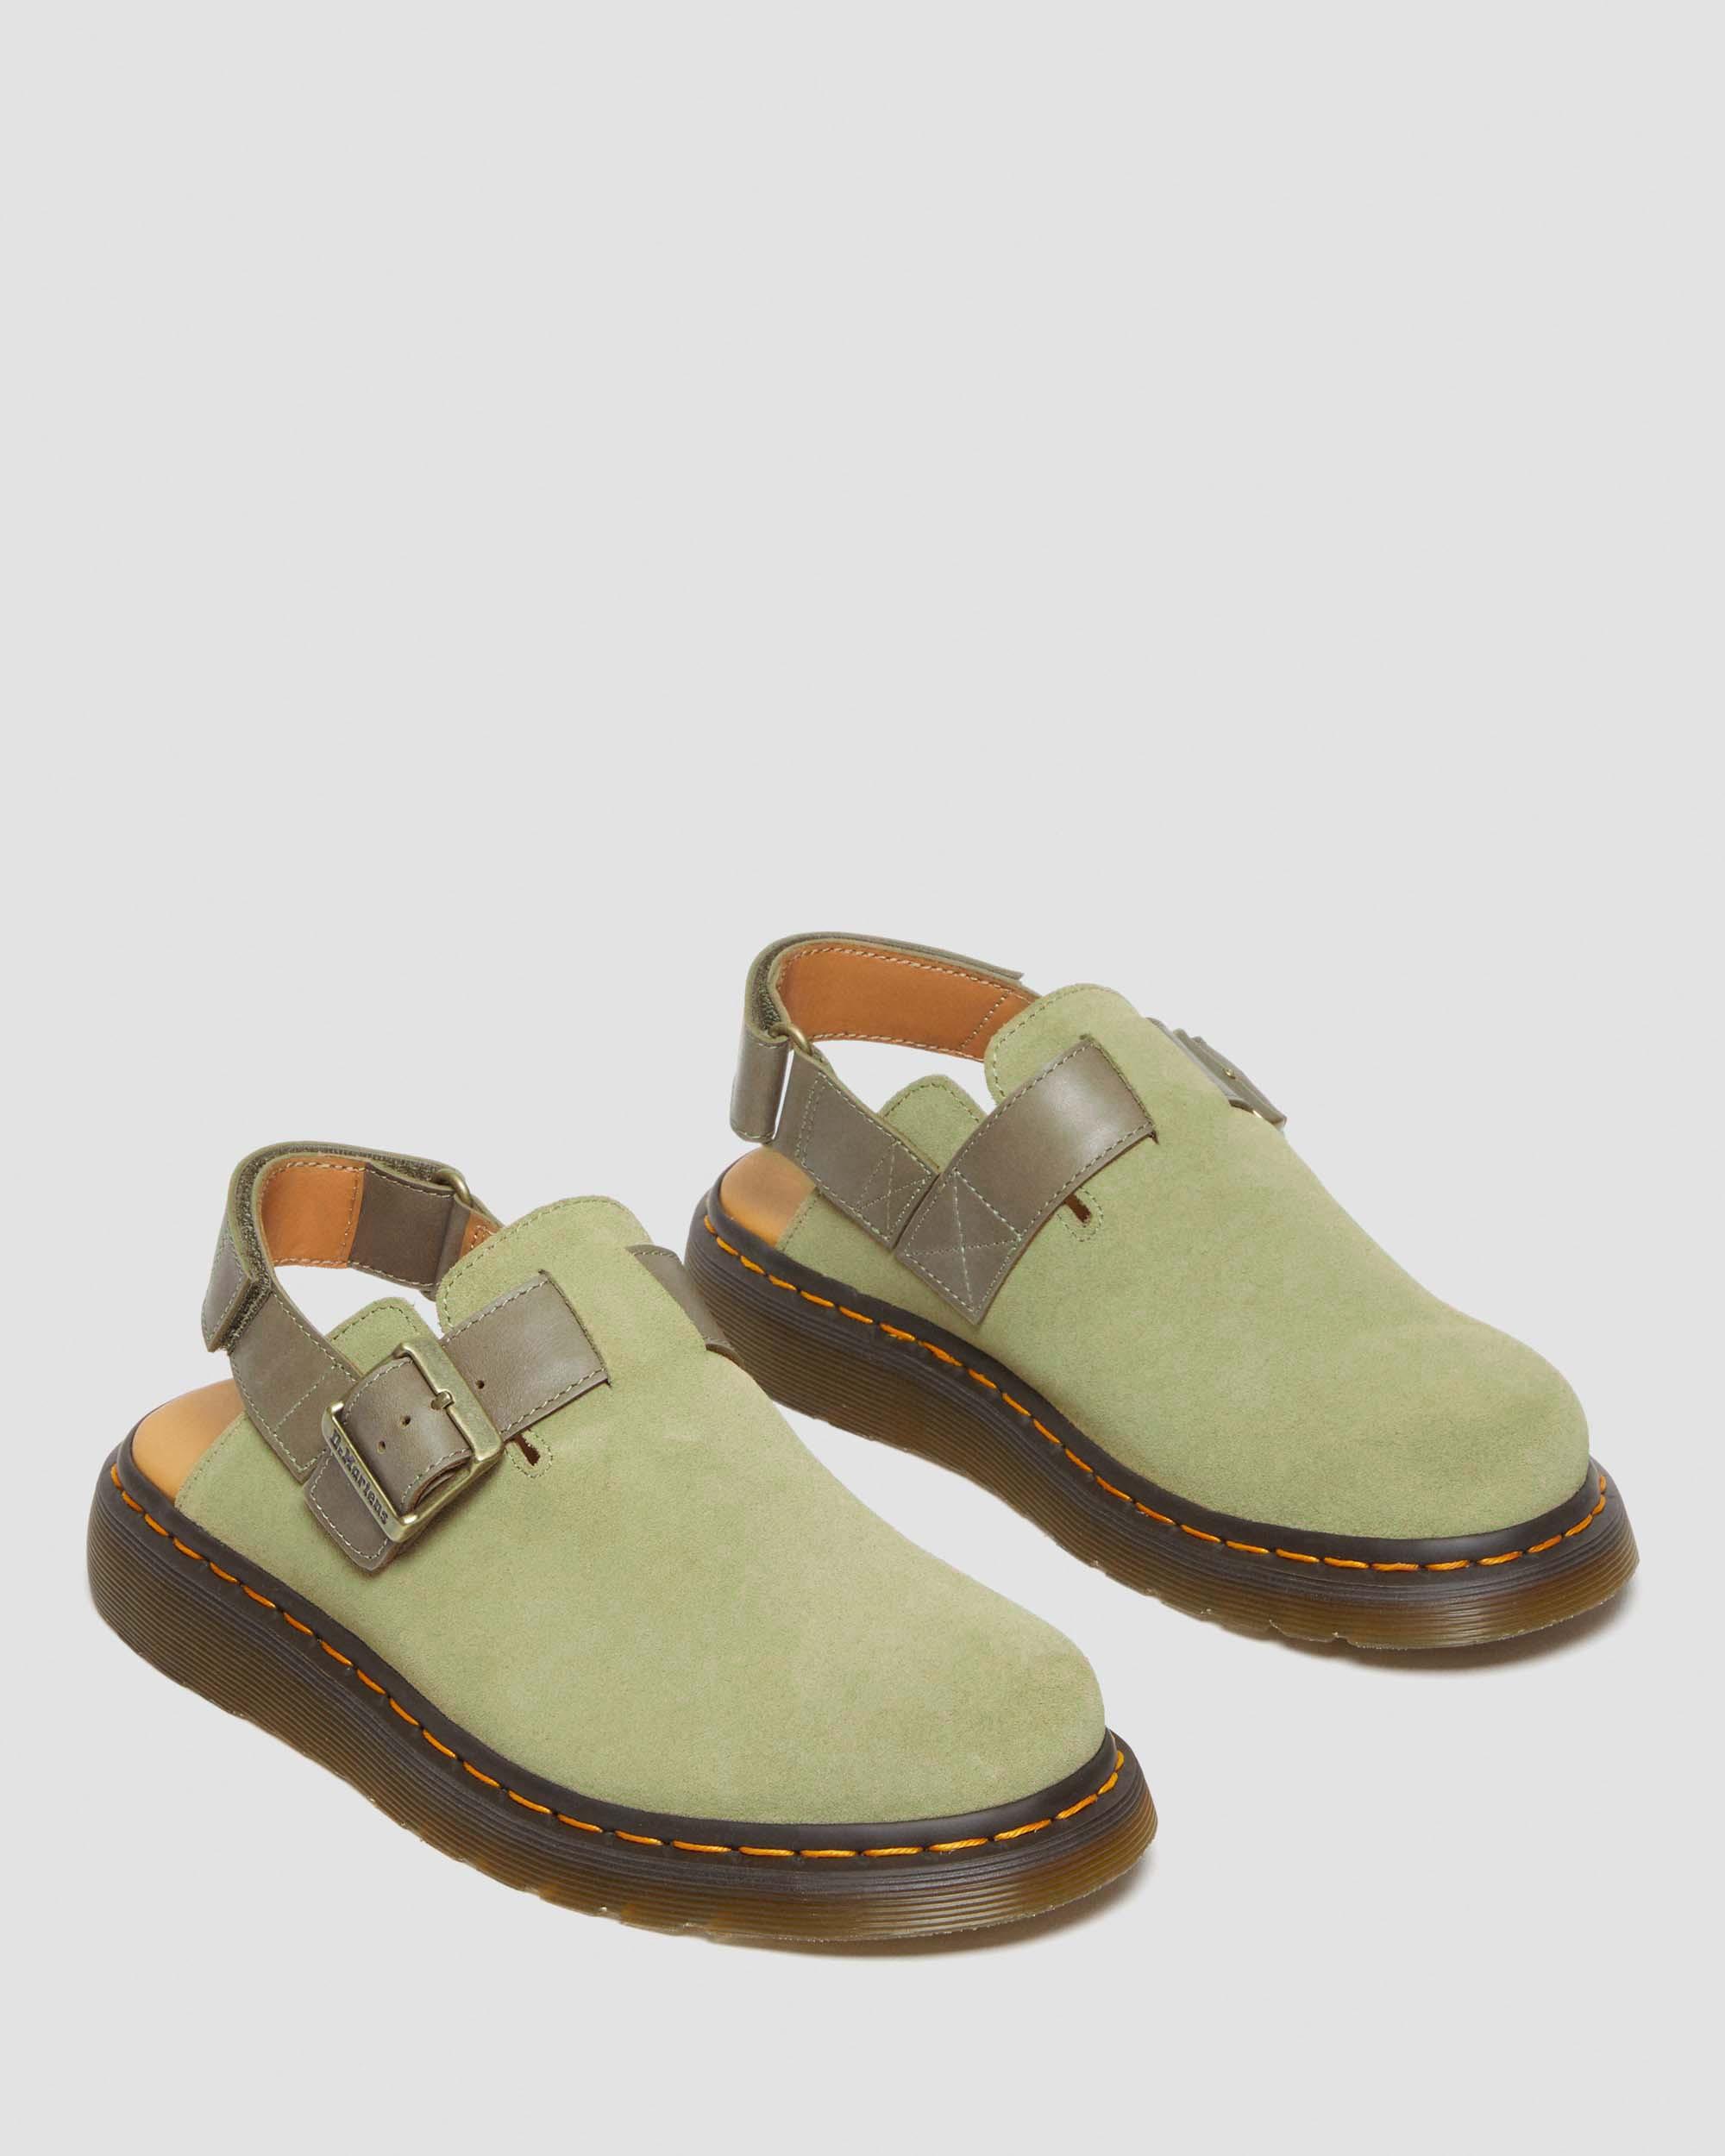 Jorge II Suede & Leather Slingback Mules in Pale Olive+Olive